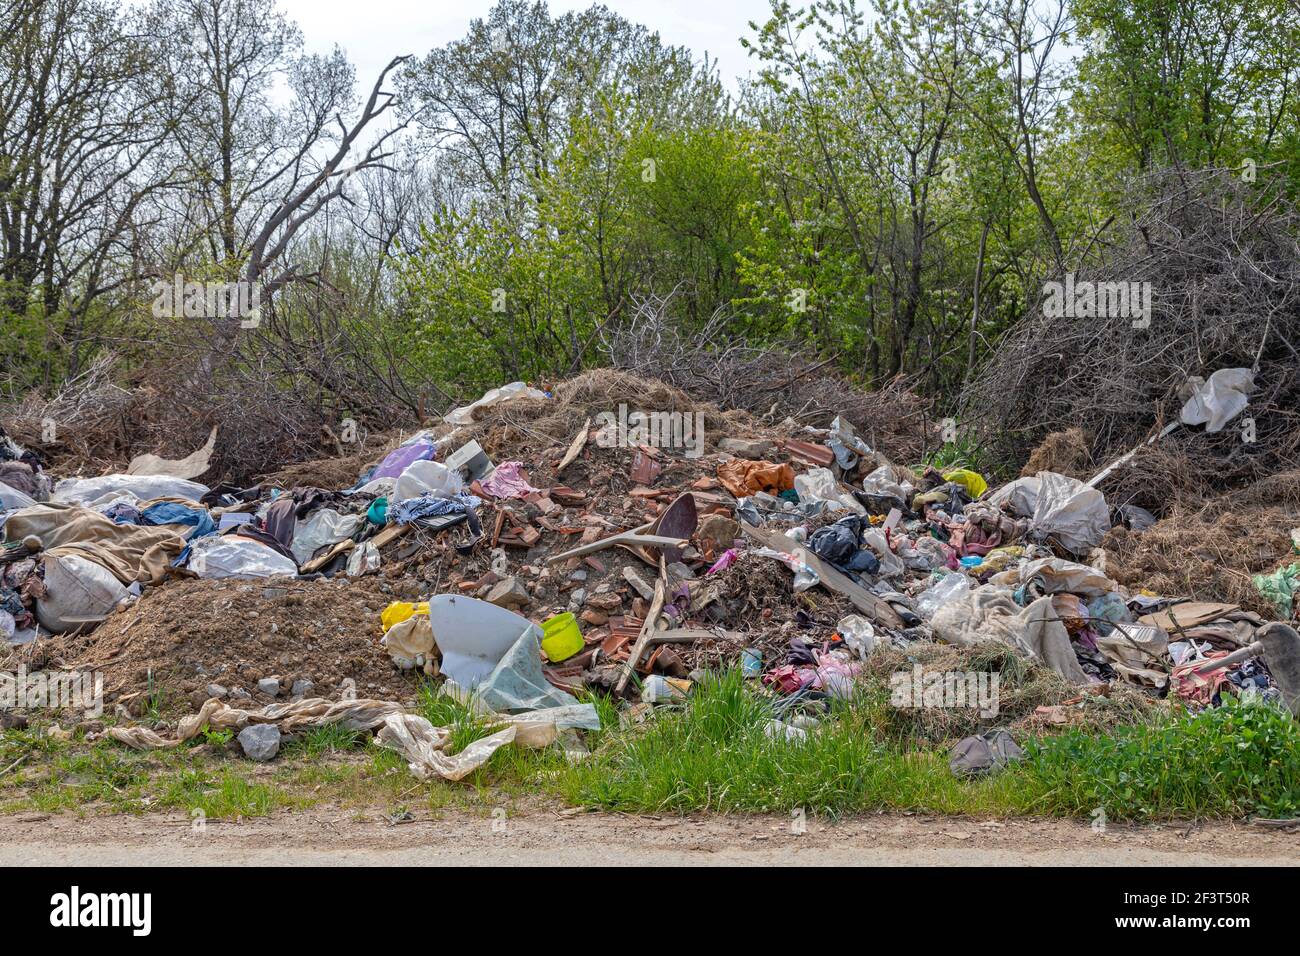 Illegal Dump Site at Side of Road Environment Pollution Problems Stock Photo